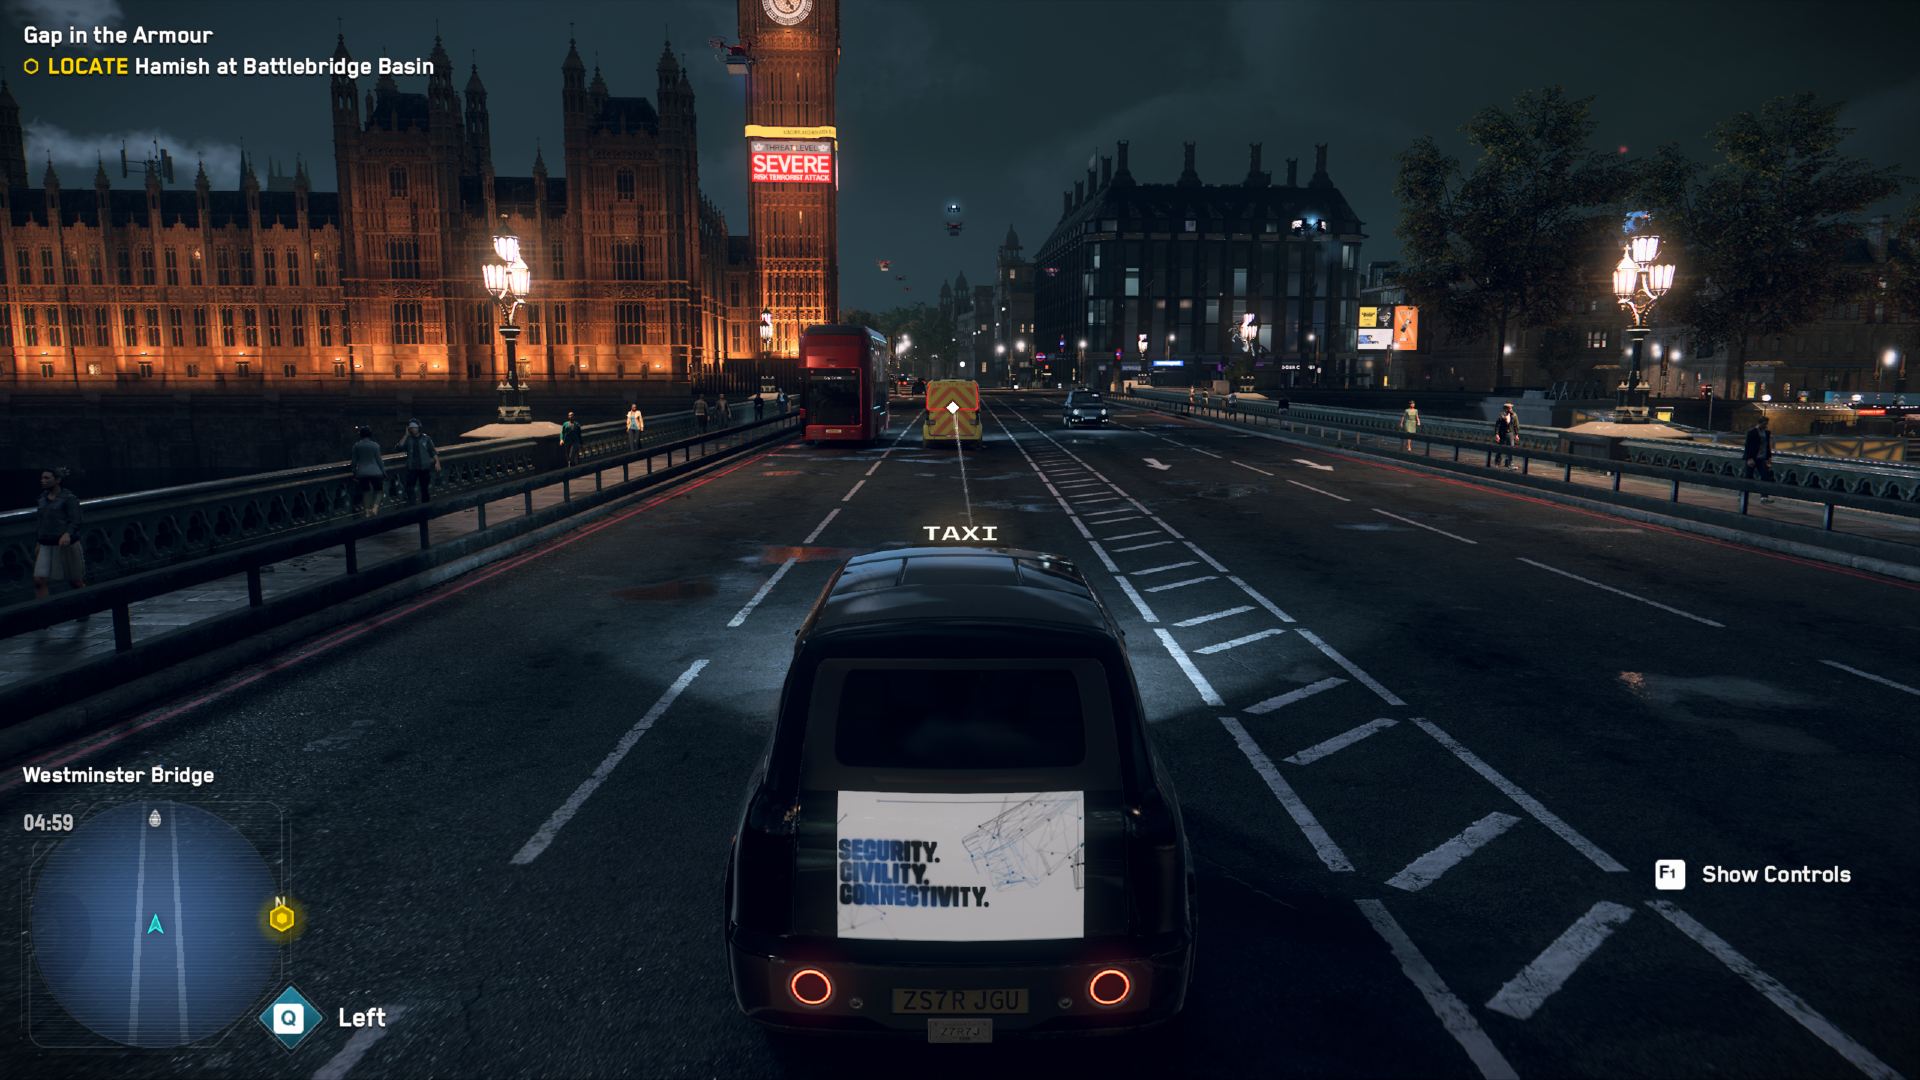 Watch Dogs: Legion PC Review